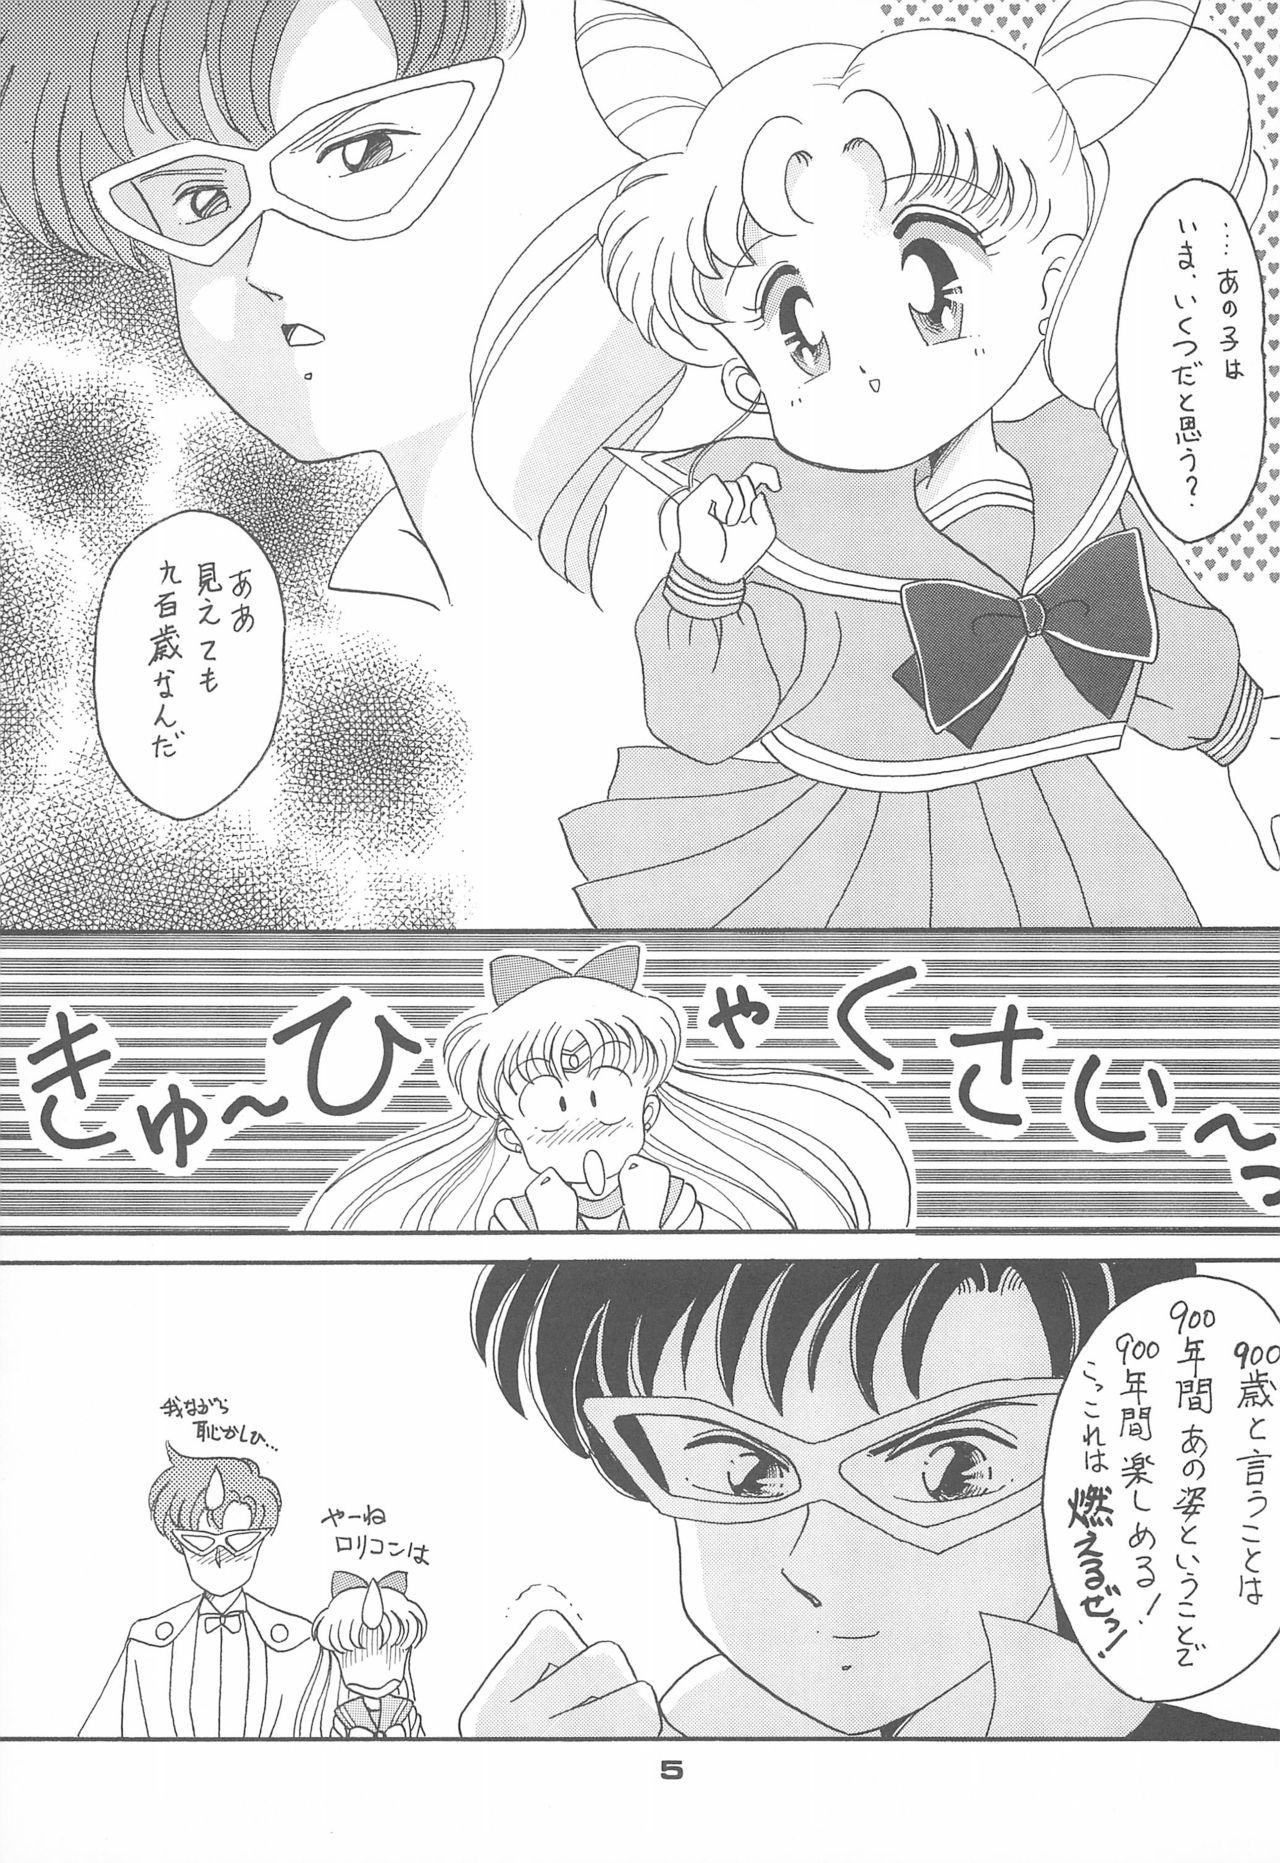 Pigtails Ponponpon 4 - Sailor moon White Girl - Page 7